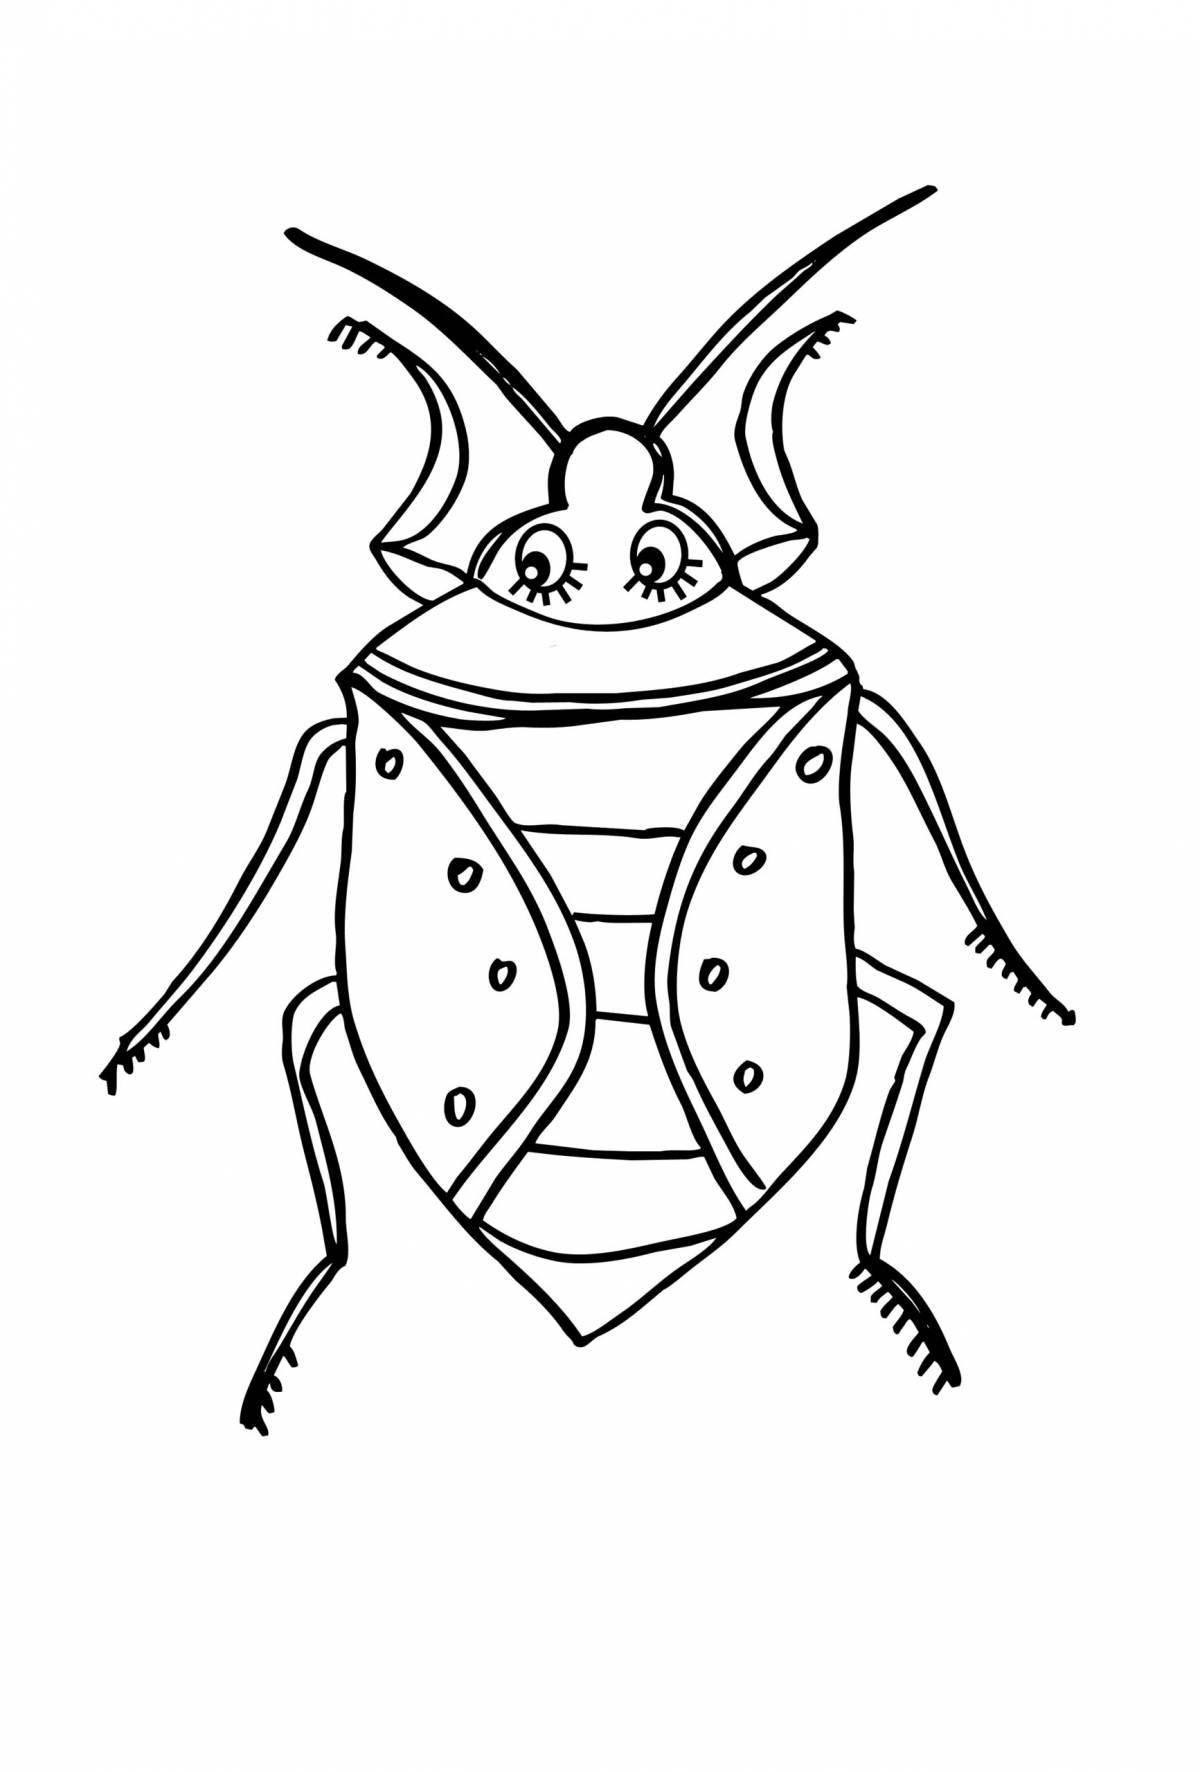 Outstanding beetle coloring book for kids